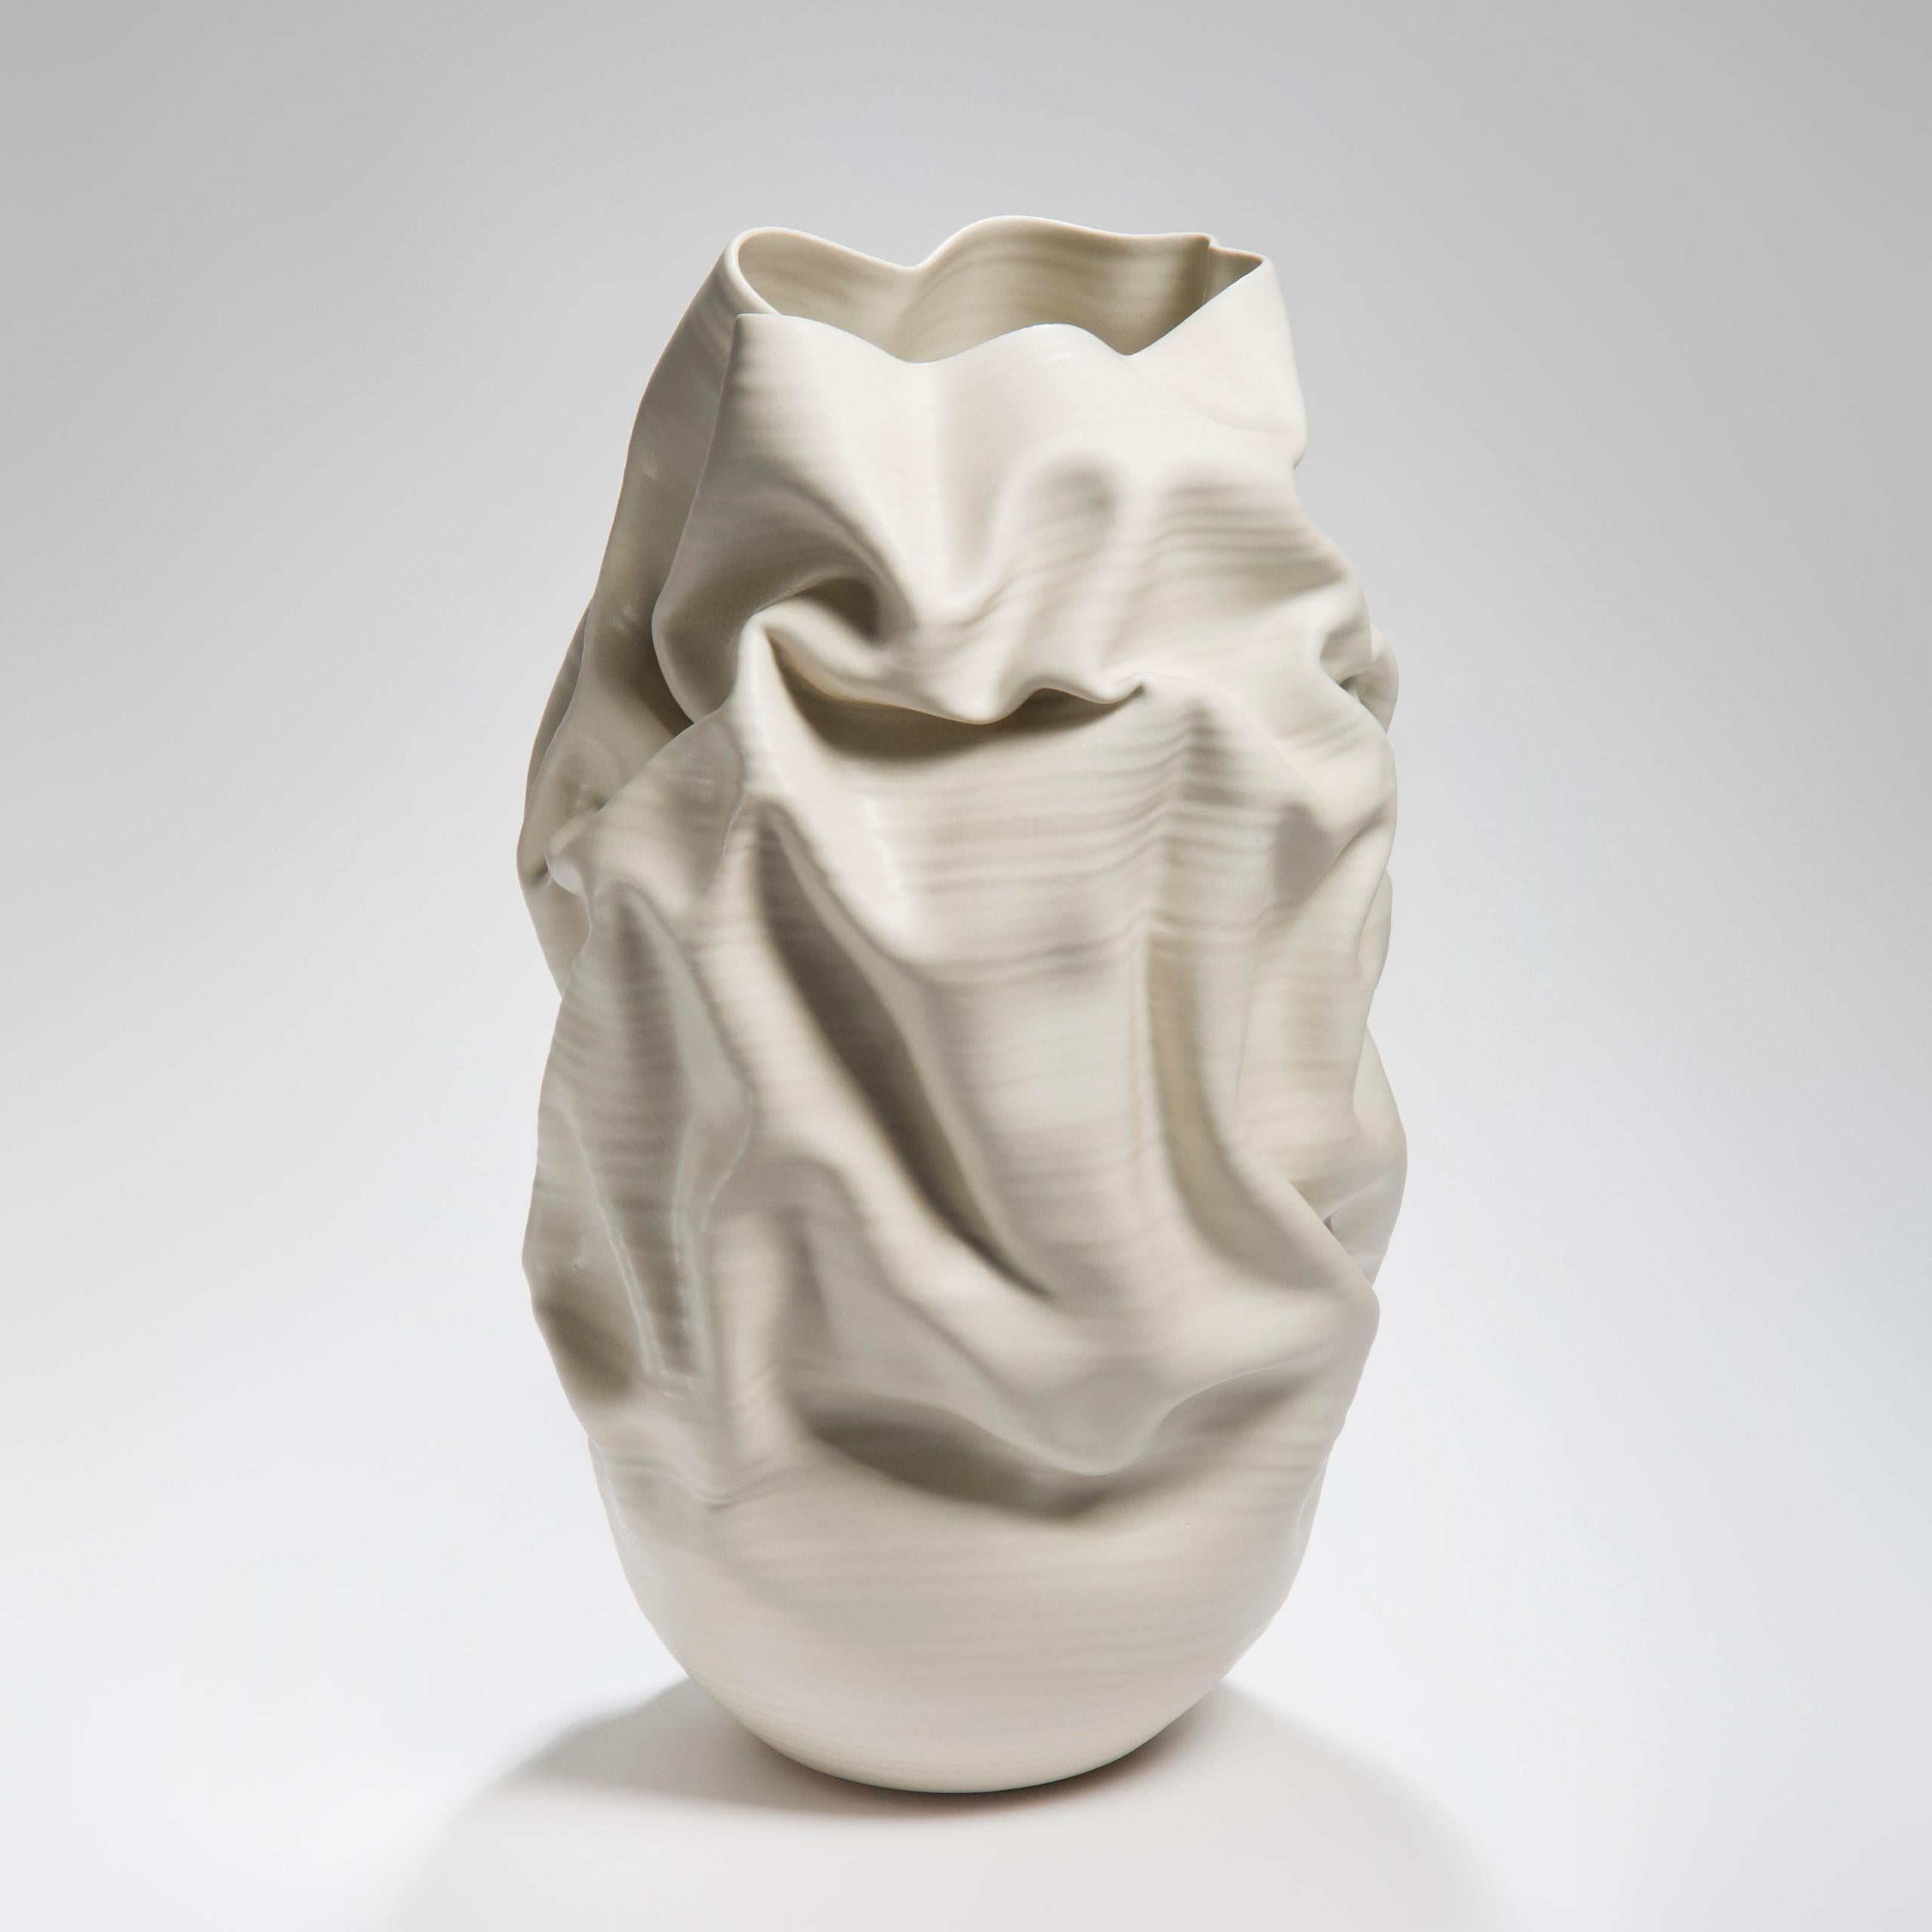 Tall white crumpled form No 31 is a unique ceramic sculptural vessel by the British artist Nicholas Arroyave-Portela.

Nicholas Arroyave-Portela’s professional ceramic practice began in 1994. After 20 years based in London, he moved and set up his